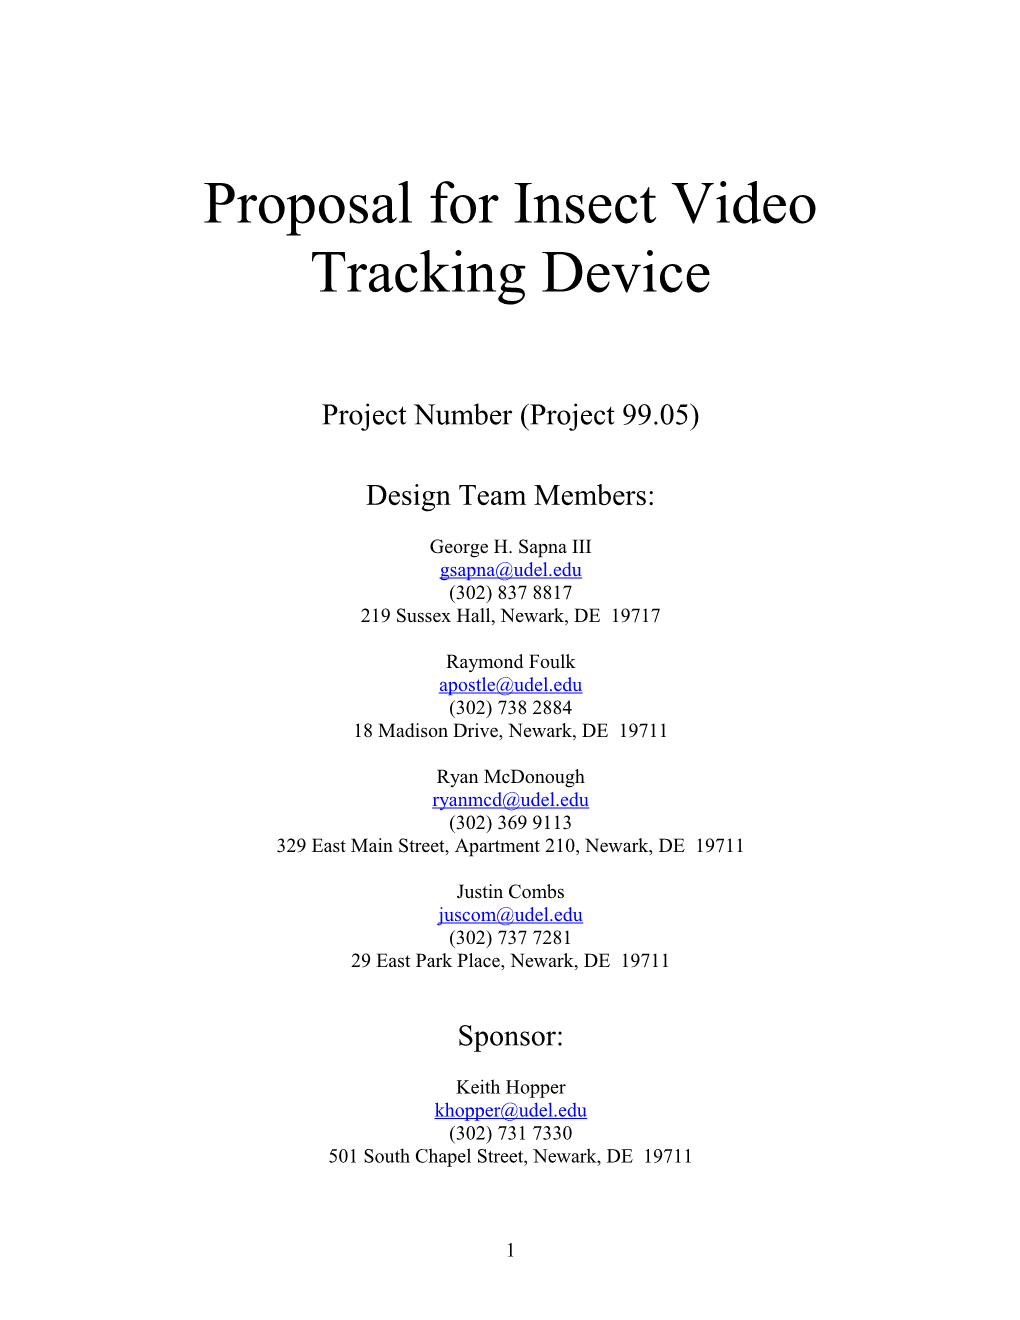 Proposal for Insect Video Tracking Device